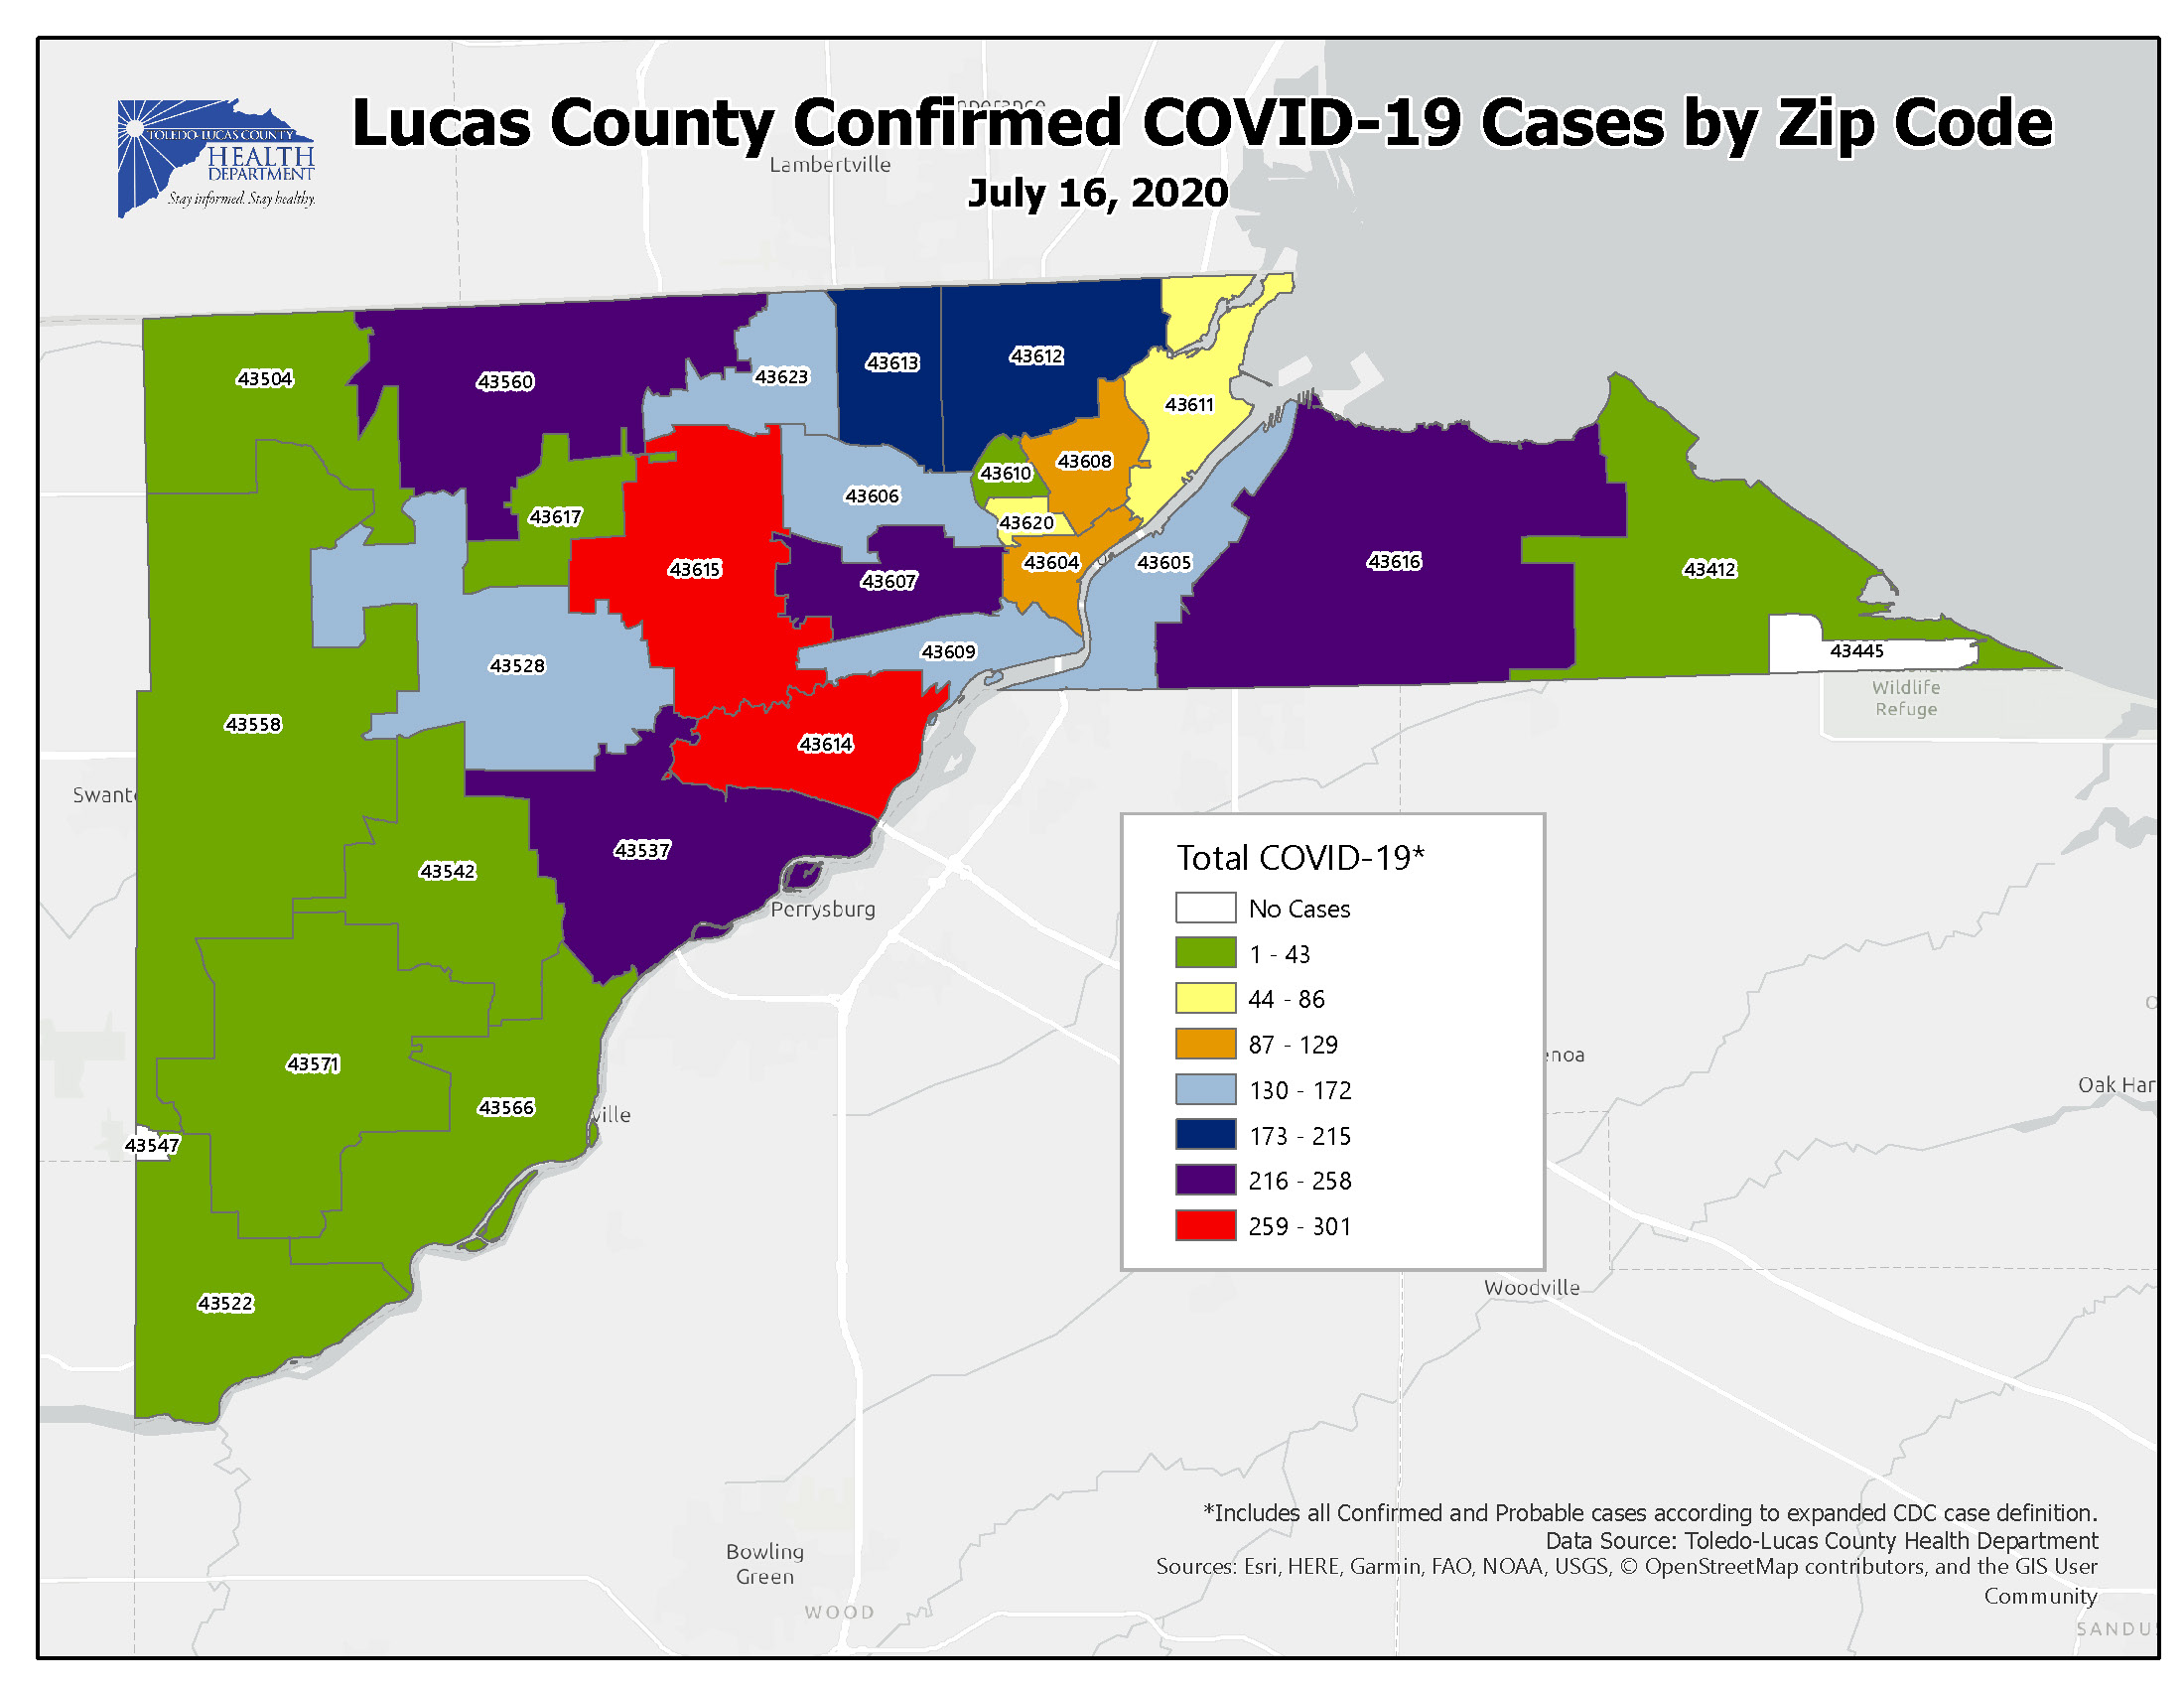 Lucas County COVID cases and 